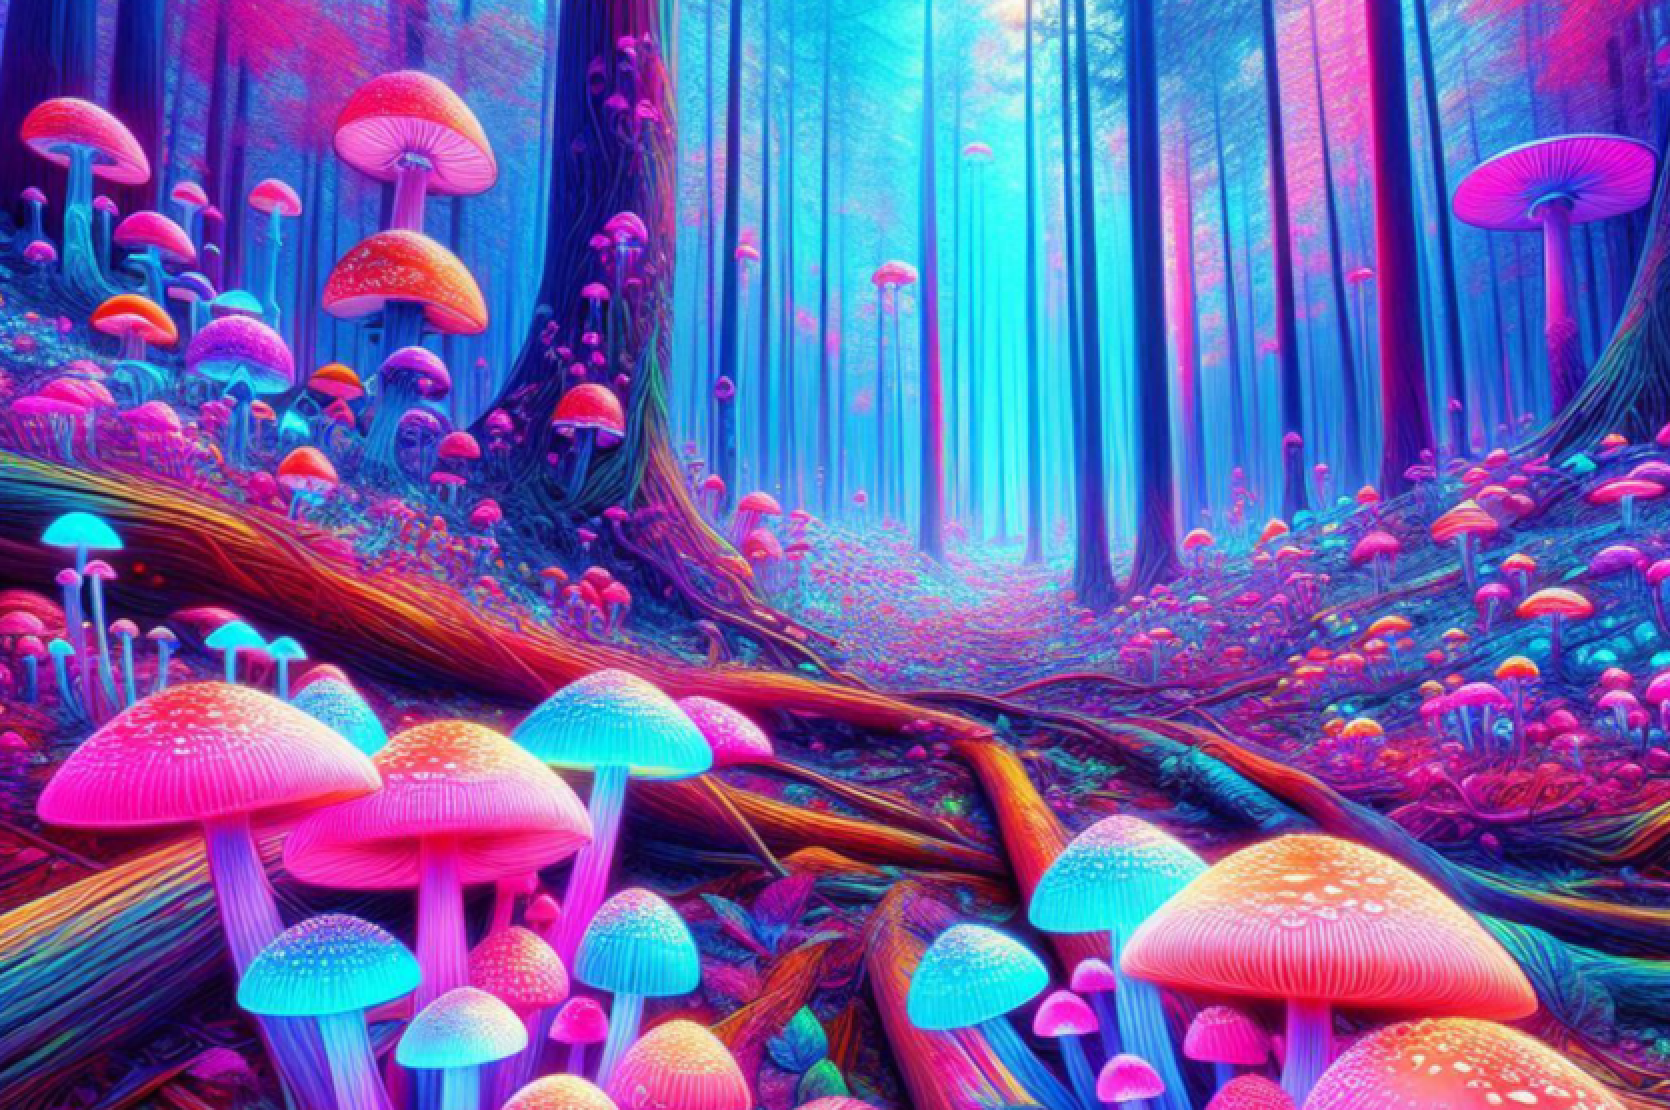 Perplexity's artificial intelligence started hallucinating about mushrooms instead of summarizing simple text